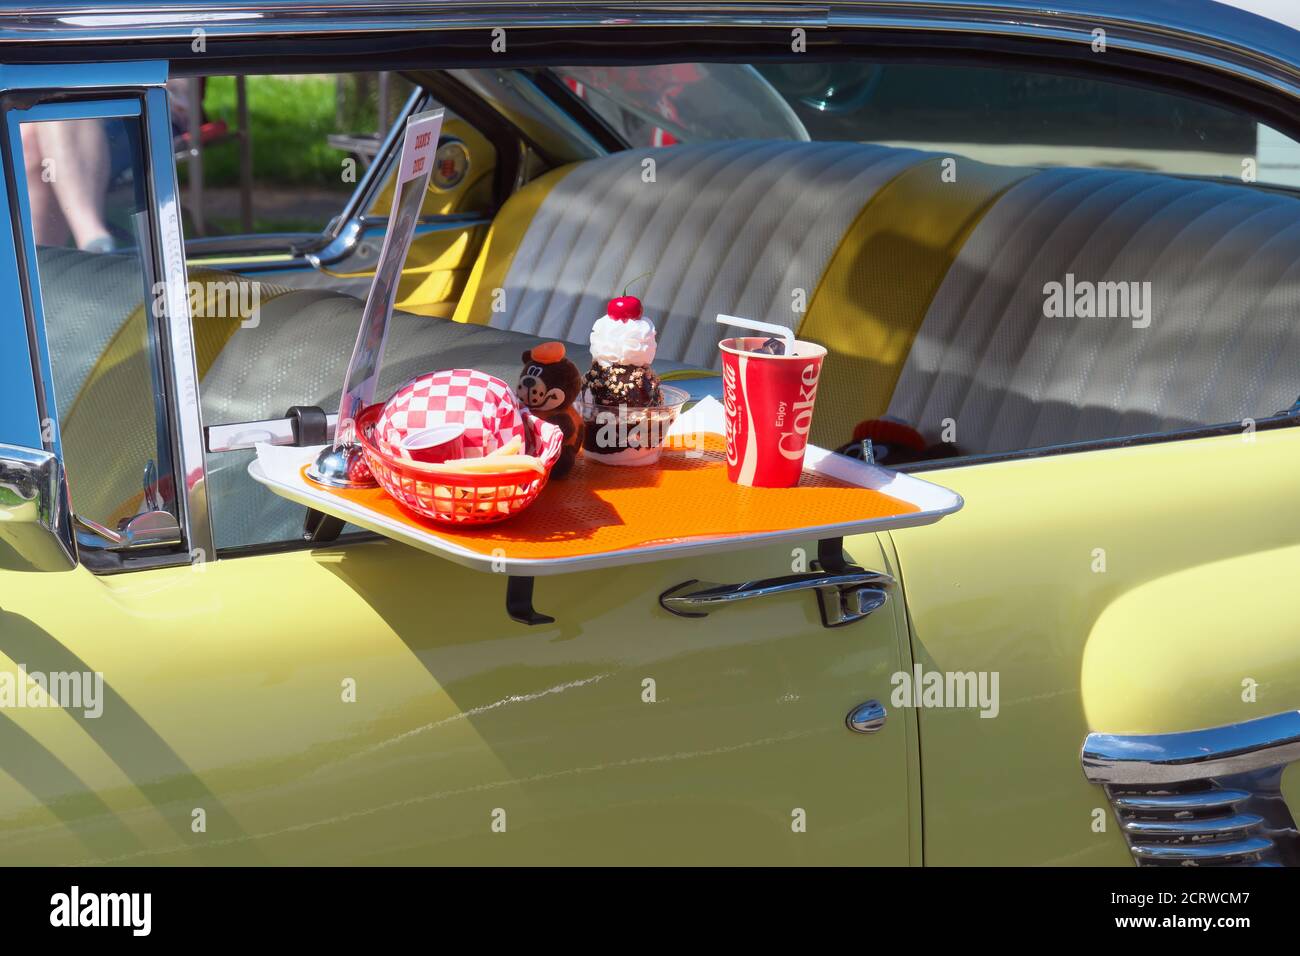 Vintage yellow 2 door Mercury hardtop (`56 Mercury?) with take-out food tray at a car show in Maple Ridge, B. C., Canada, May 2019. Stock Photo